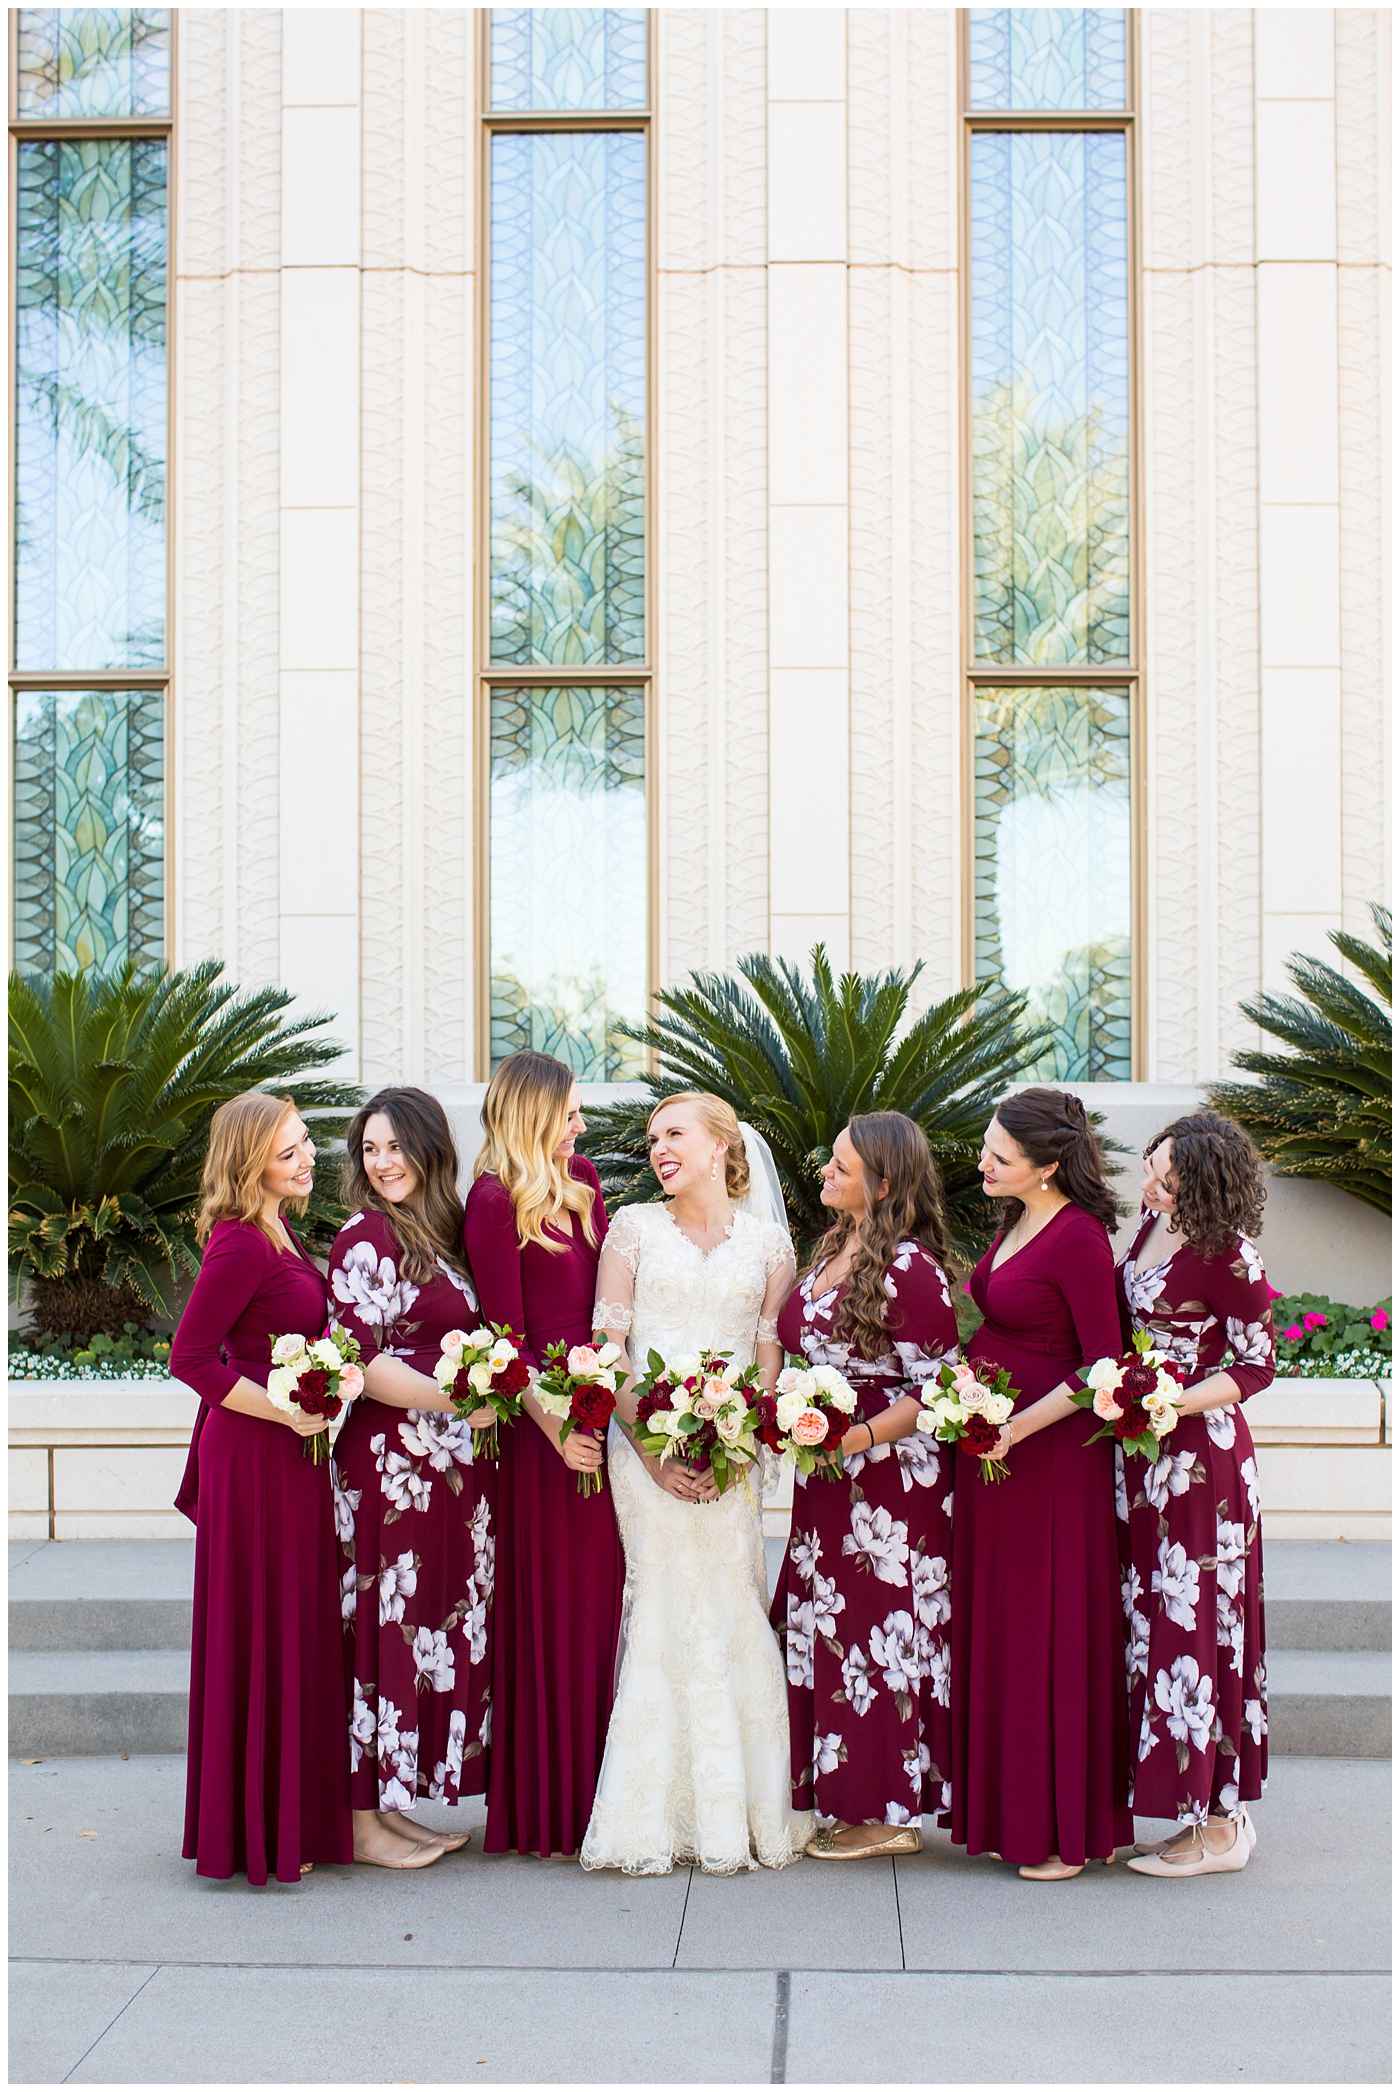 bride in sleeved lace dress with burgundy, white, and green wedding bouquet with bridesmaids in long sleeve burgundy and floral dresses wedding day portrait at Gilbert LDS temple